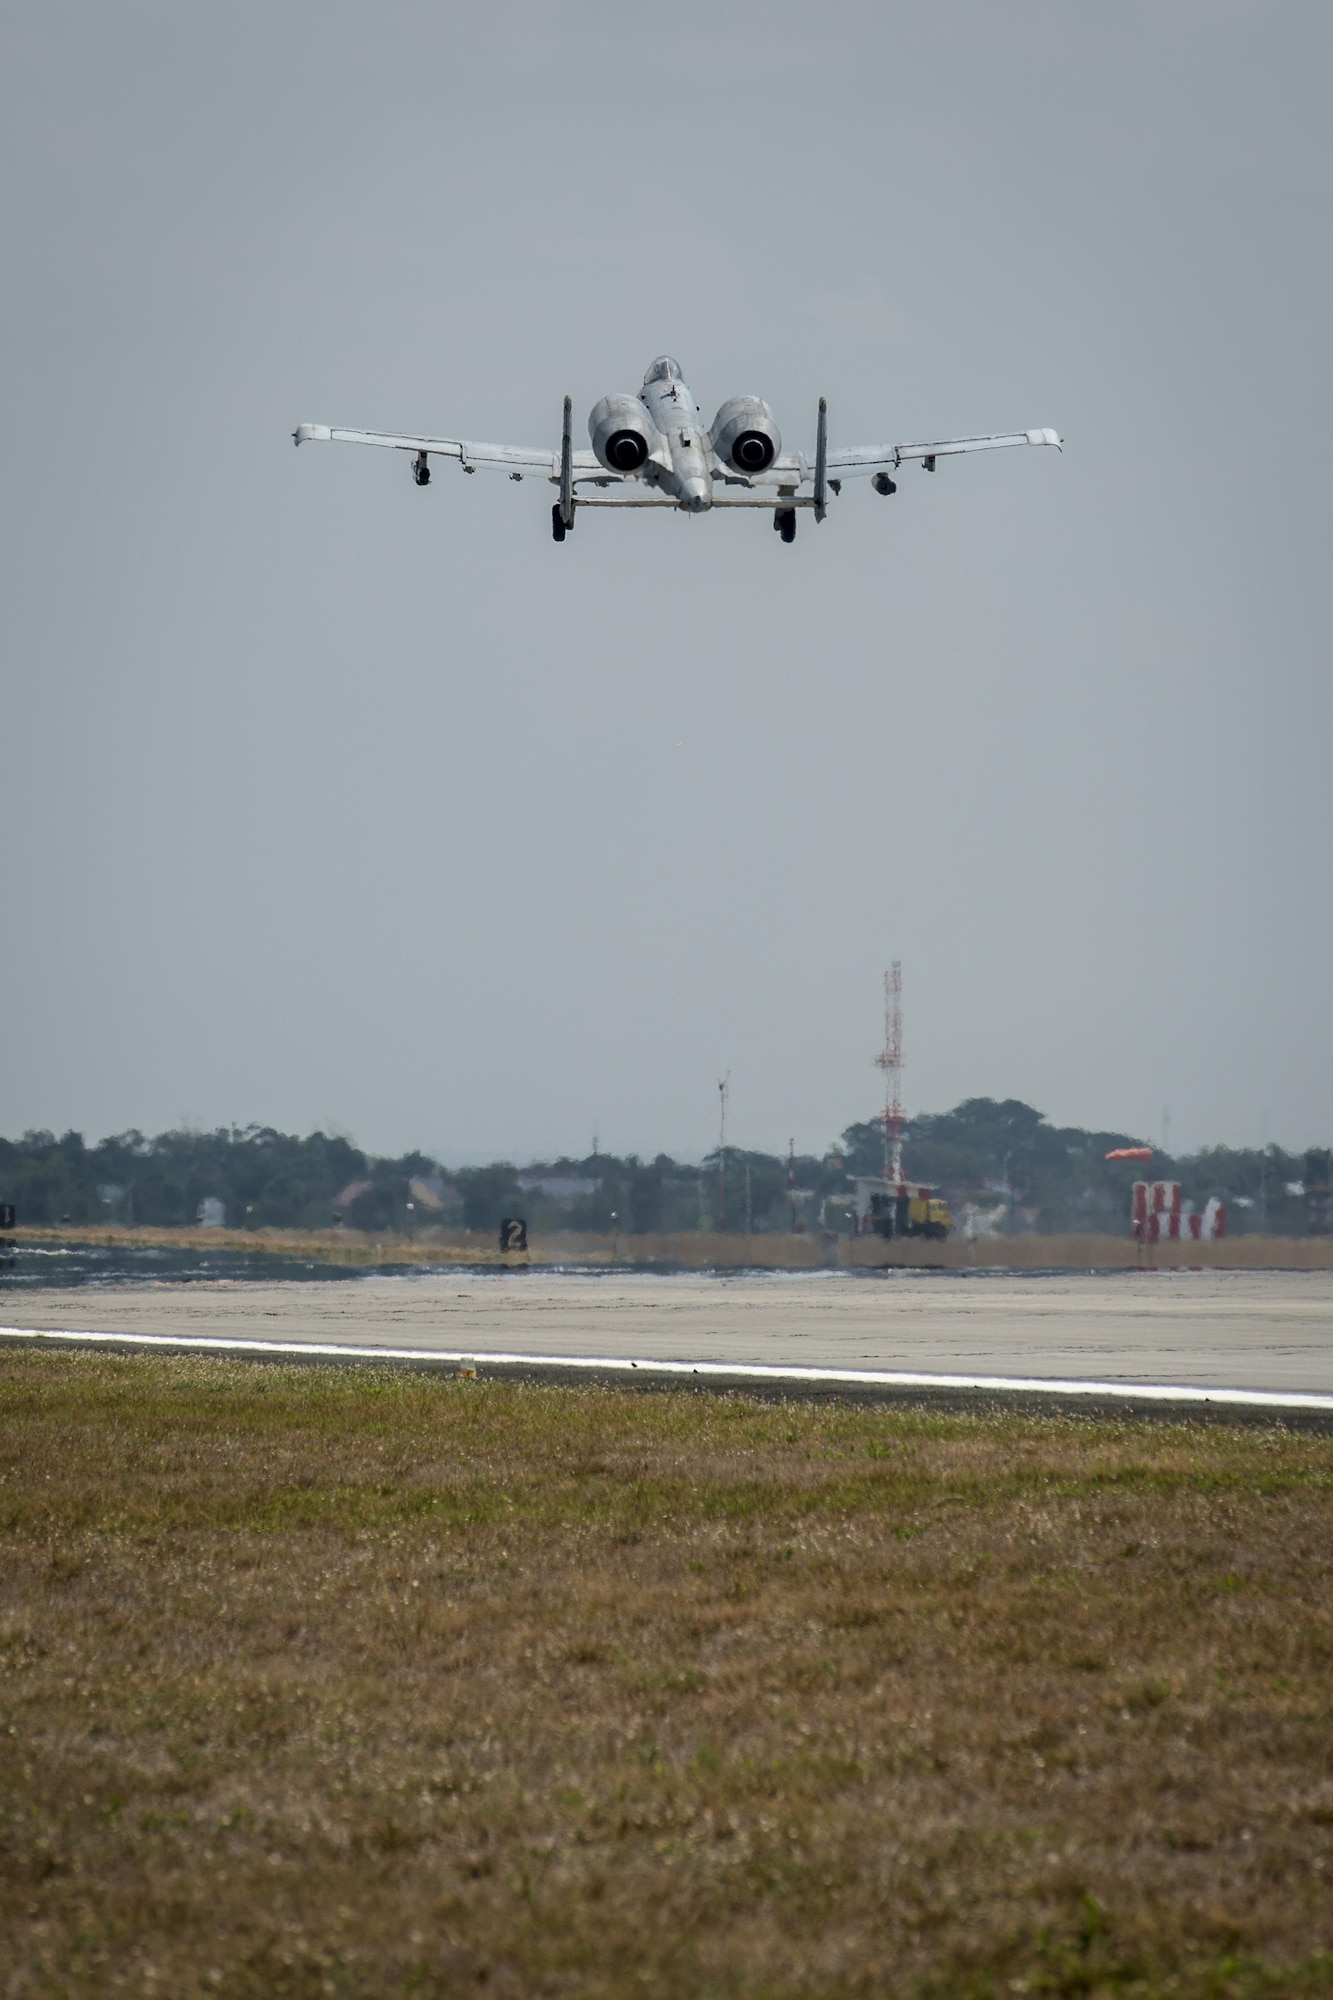 A U.S. Air Force A-10C Thunderbolt II, with the 51st Fighter Wing, Osan Air Base, Republic of Korea, takes off from Clark Air Base, Philippines, April 19, 2016. The A-10Cs are part of the newly stood up Air Contingent here conducting operations ranging from air and maritime domain awareness, personnel recovery, combating piracy, and assurance all nations have access to the regional air and maritime domains in accordance with international law. (U.S. Air Force photo by Staff Sgt. Benjamin W. Stratton)